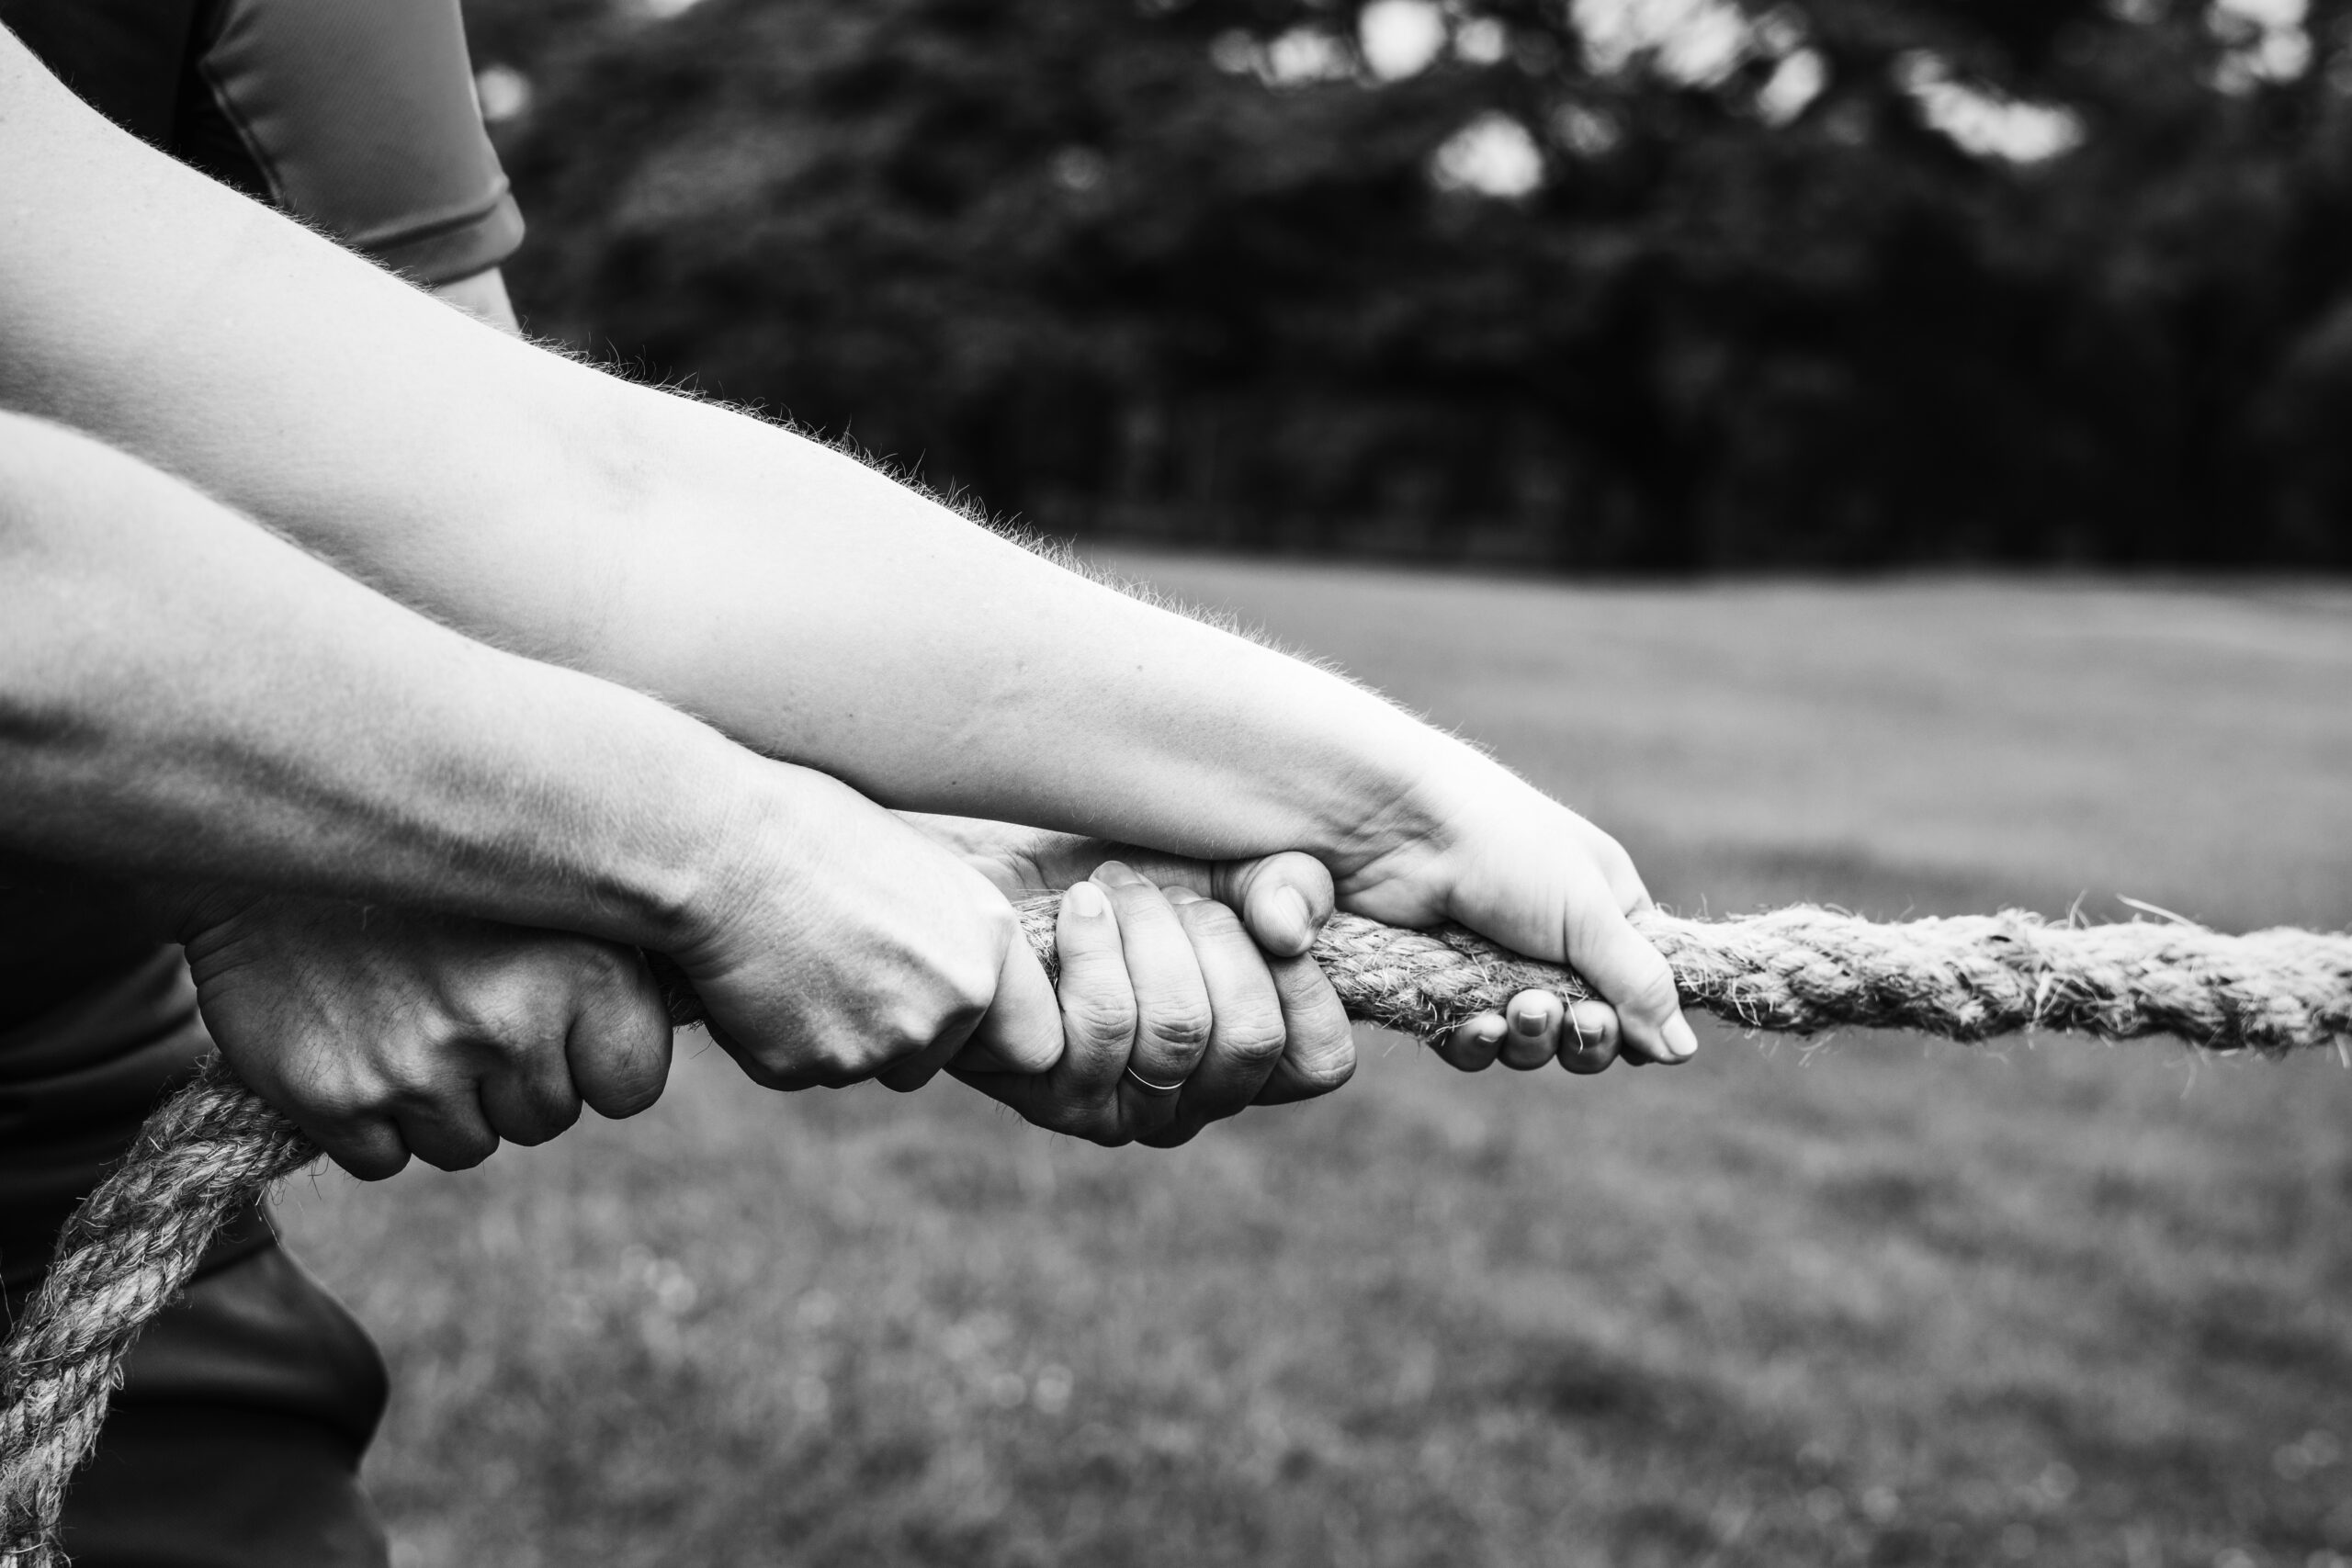 Hands pulling on rope in tug-of-war